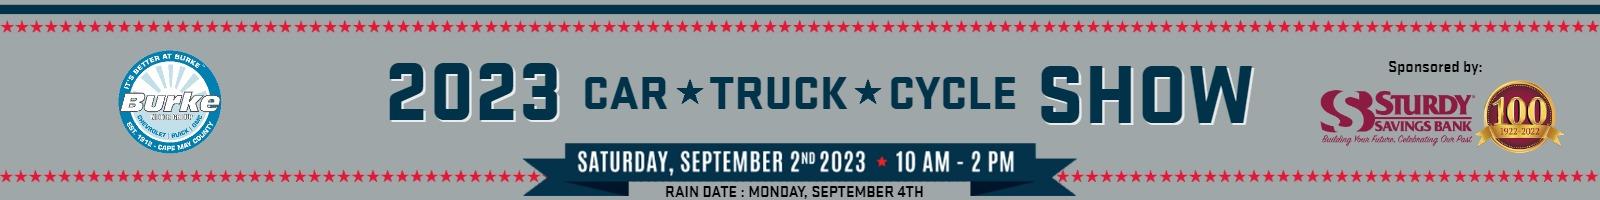 2023 Car, Truck and Cycle Show
RAIN DATE : MONDAY, SEPTEMBER 4TH